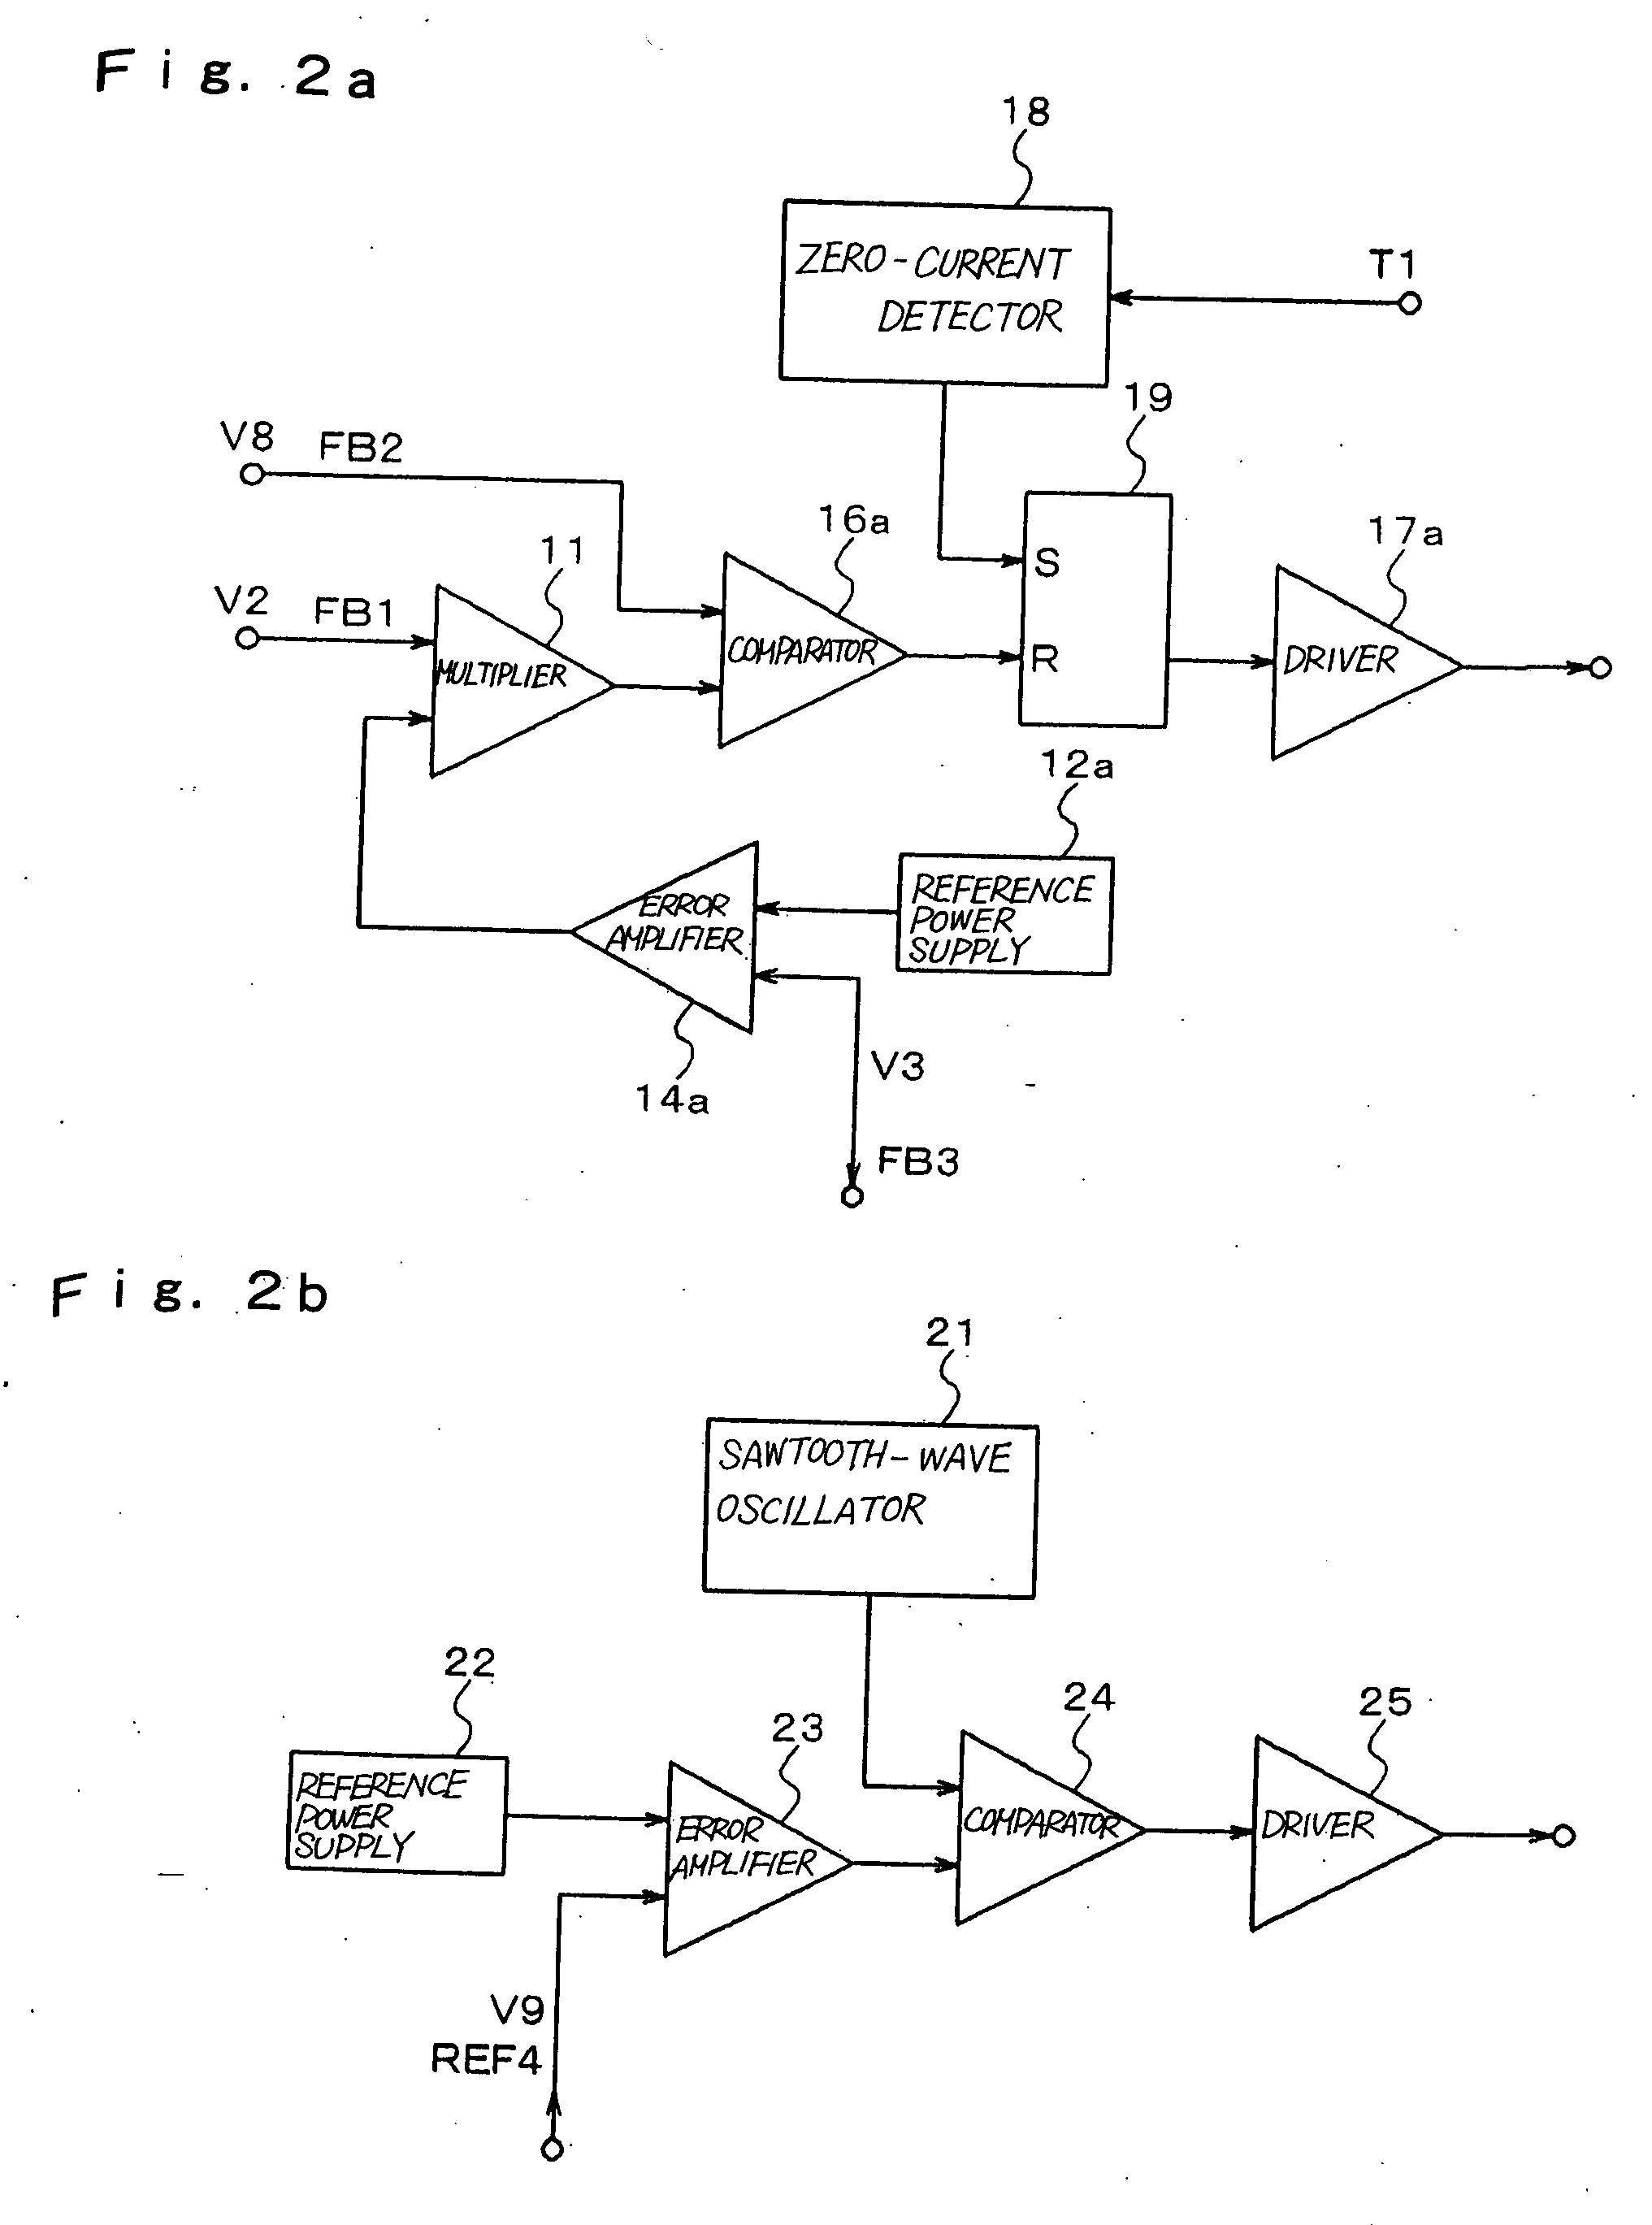 Low-voltage power supply circuit for illumination, illumination device, and low-voltage power supply output method for illumination